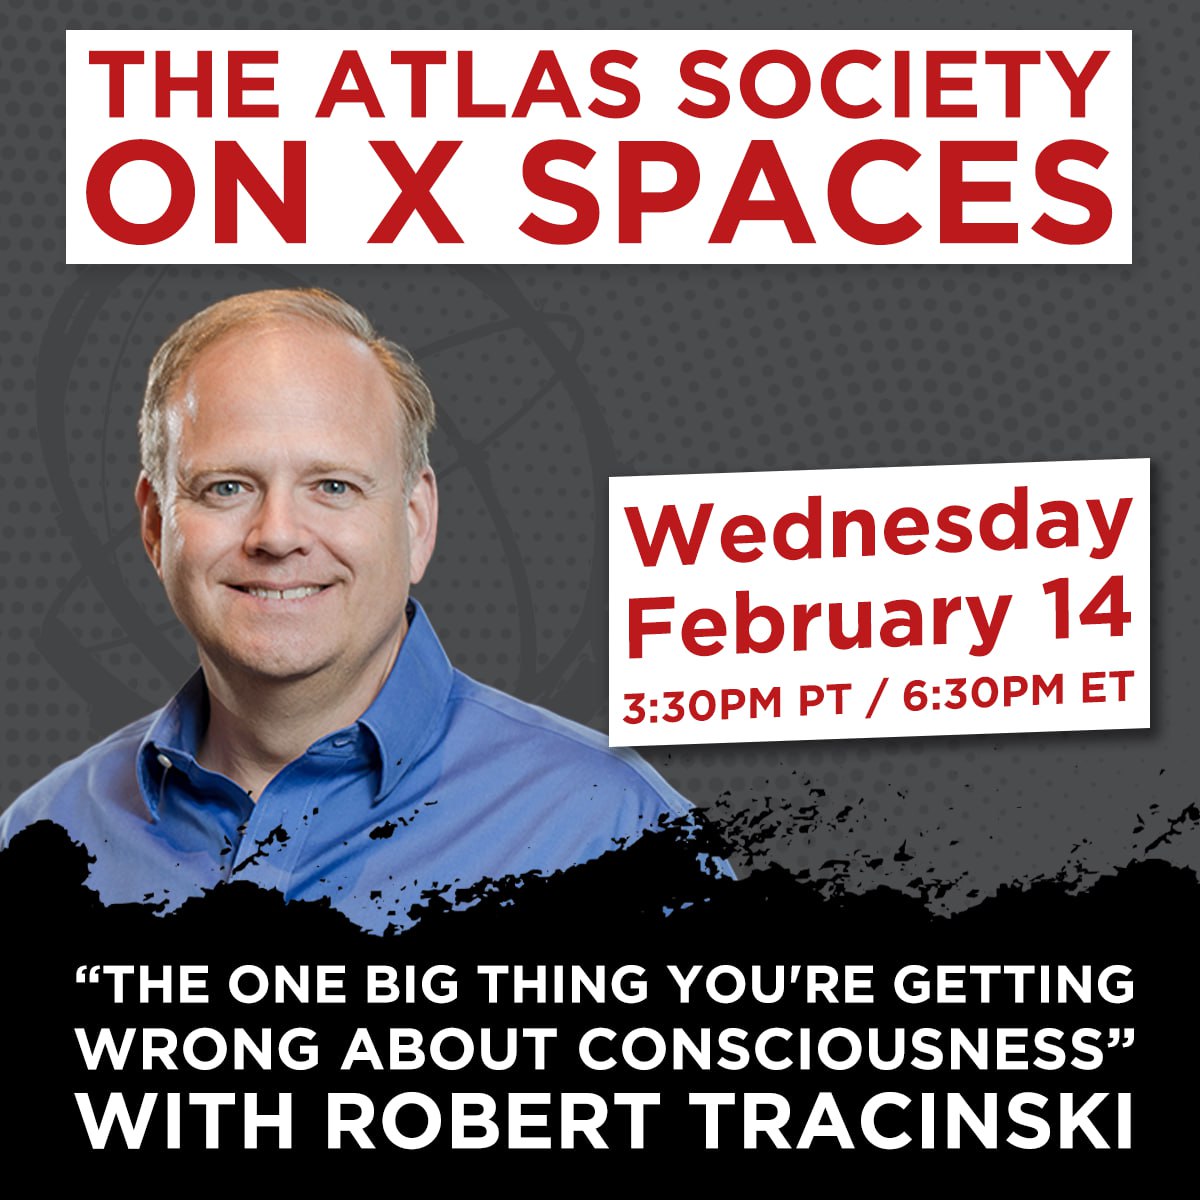 “The One Big Thing You’re Getting Wrong About Consciousness” with Robert Tracinski